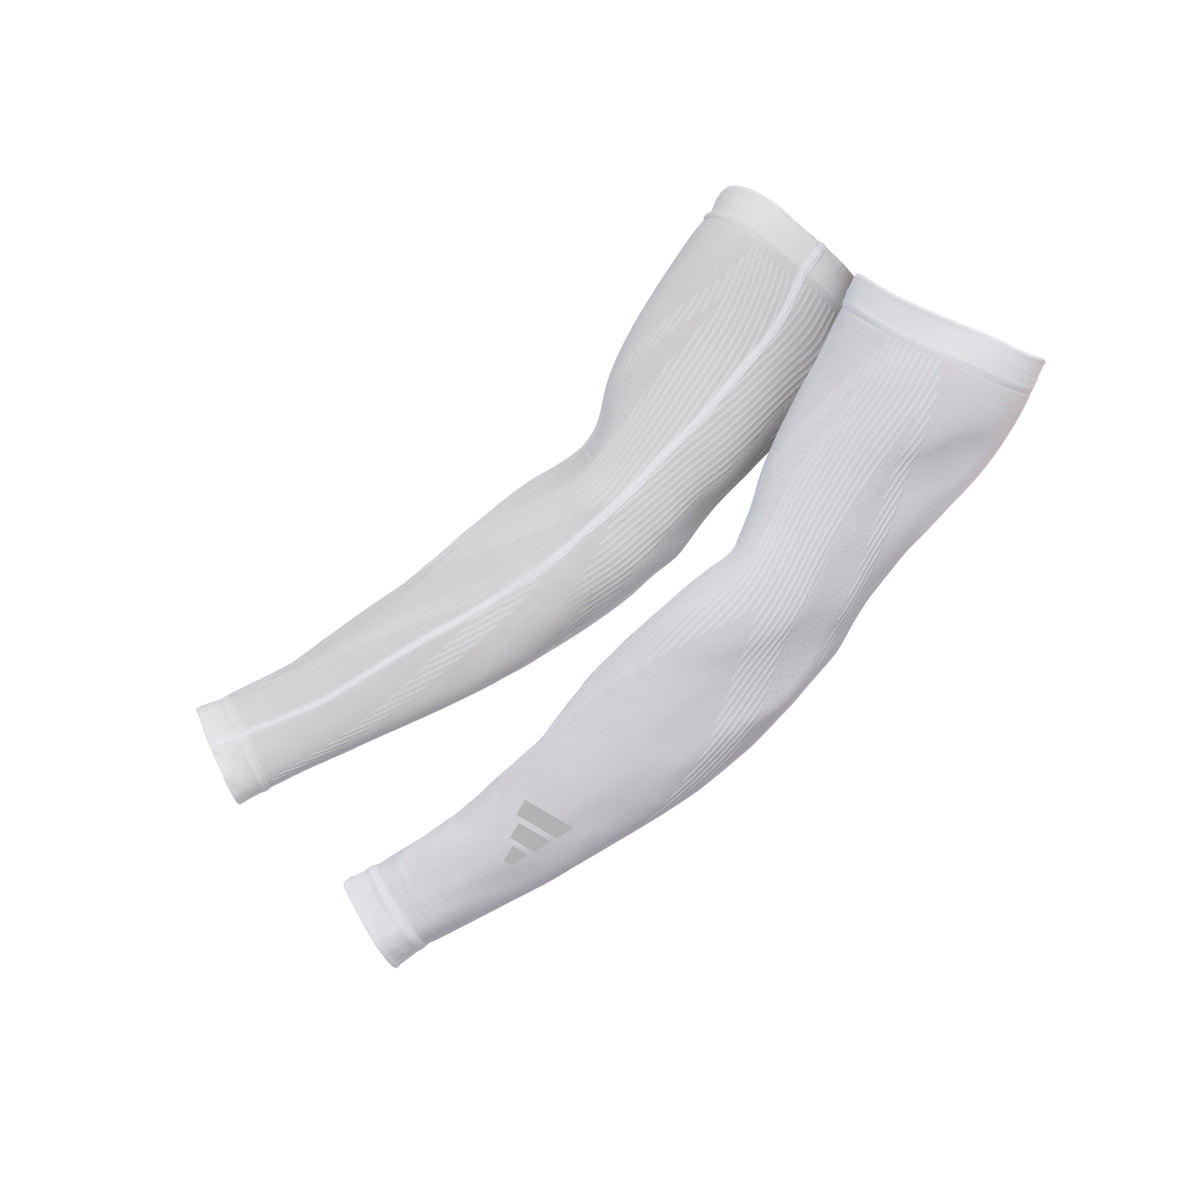 adidas Compression Arm Sleeves white both sleeves